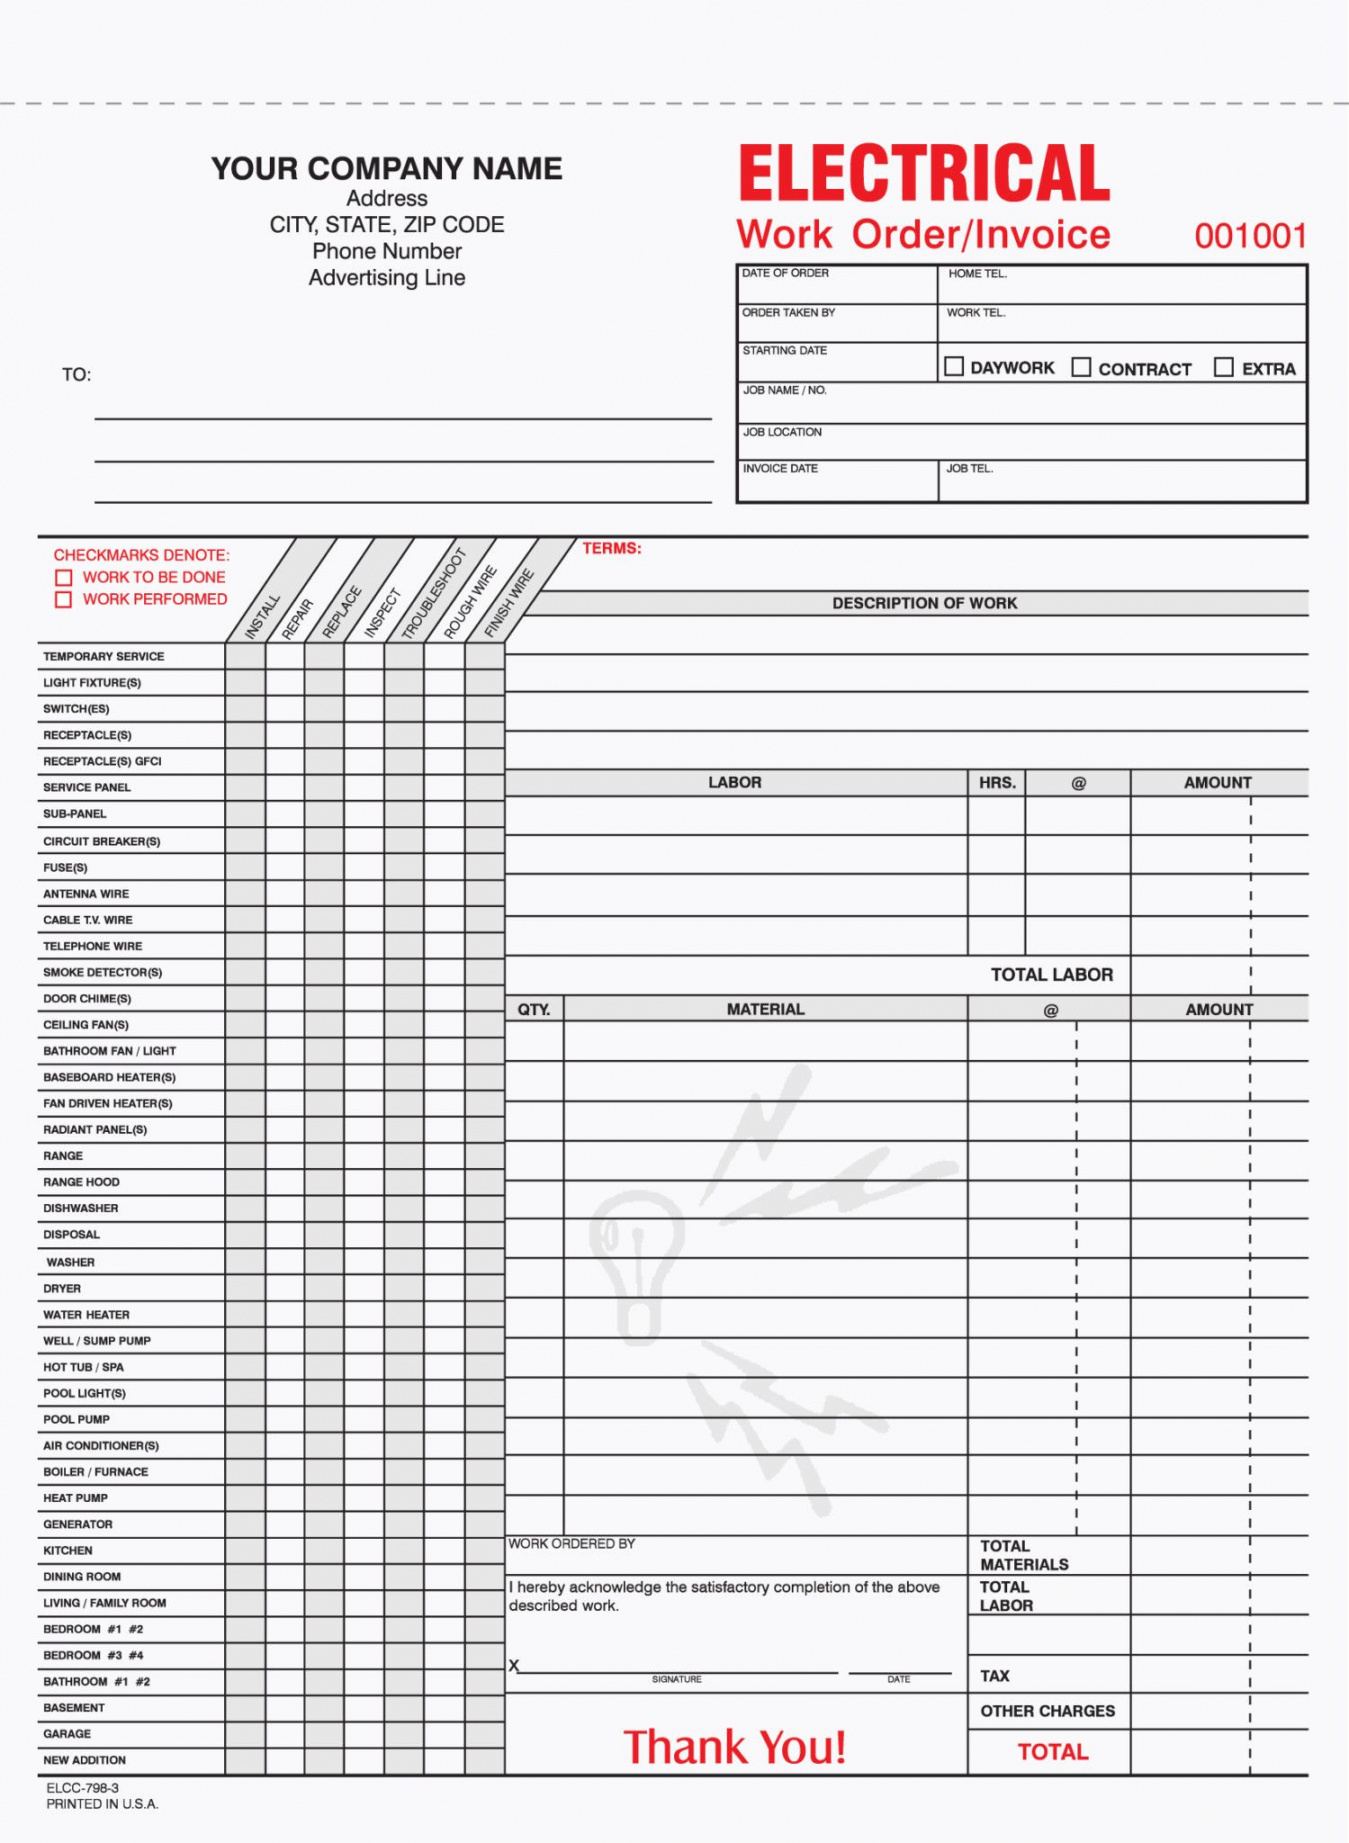 printable 3 part electrician work order forms  electrician work electrician estimate template sample